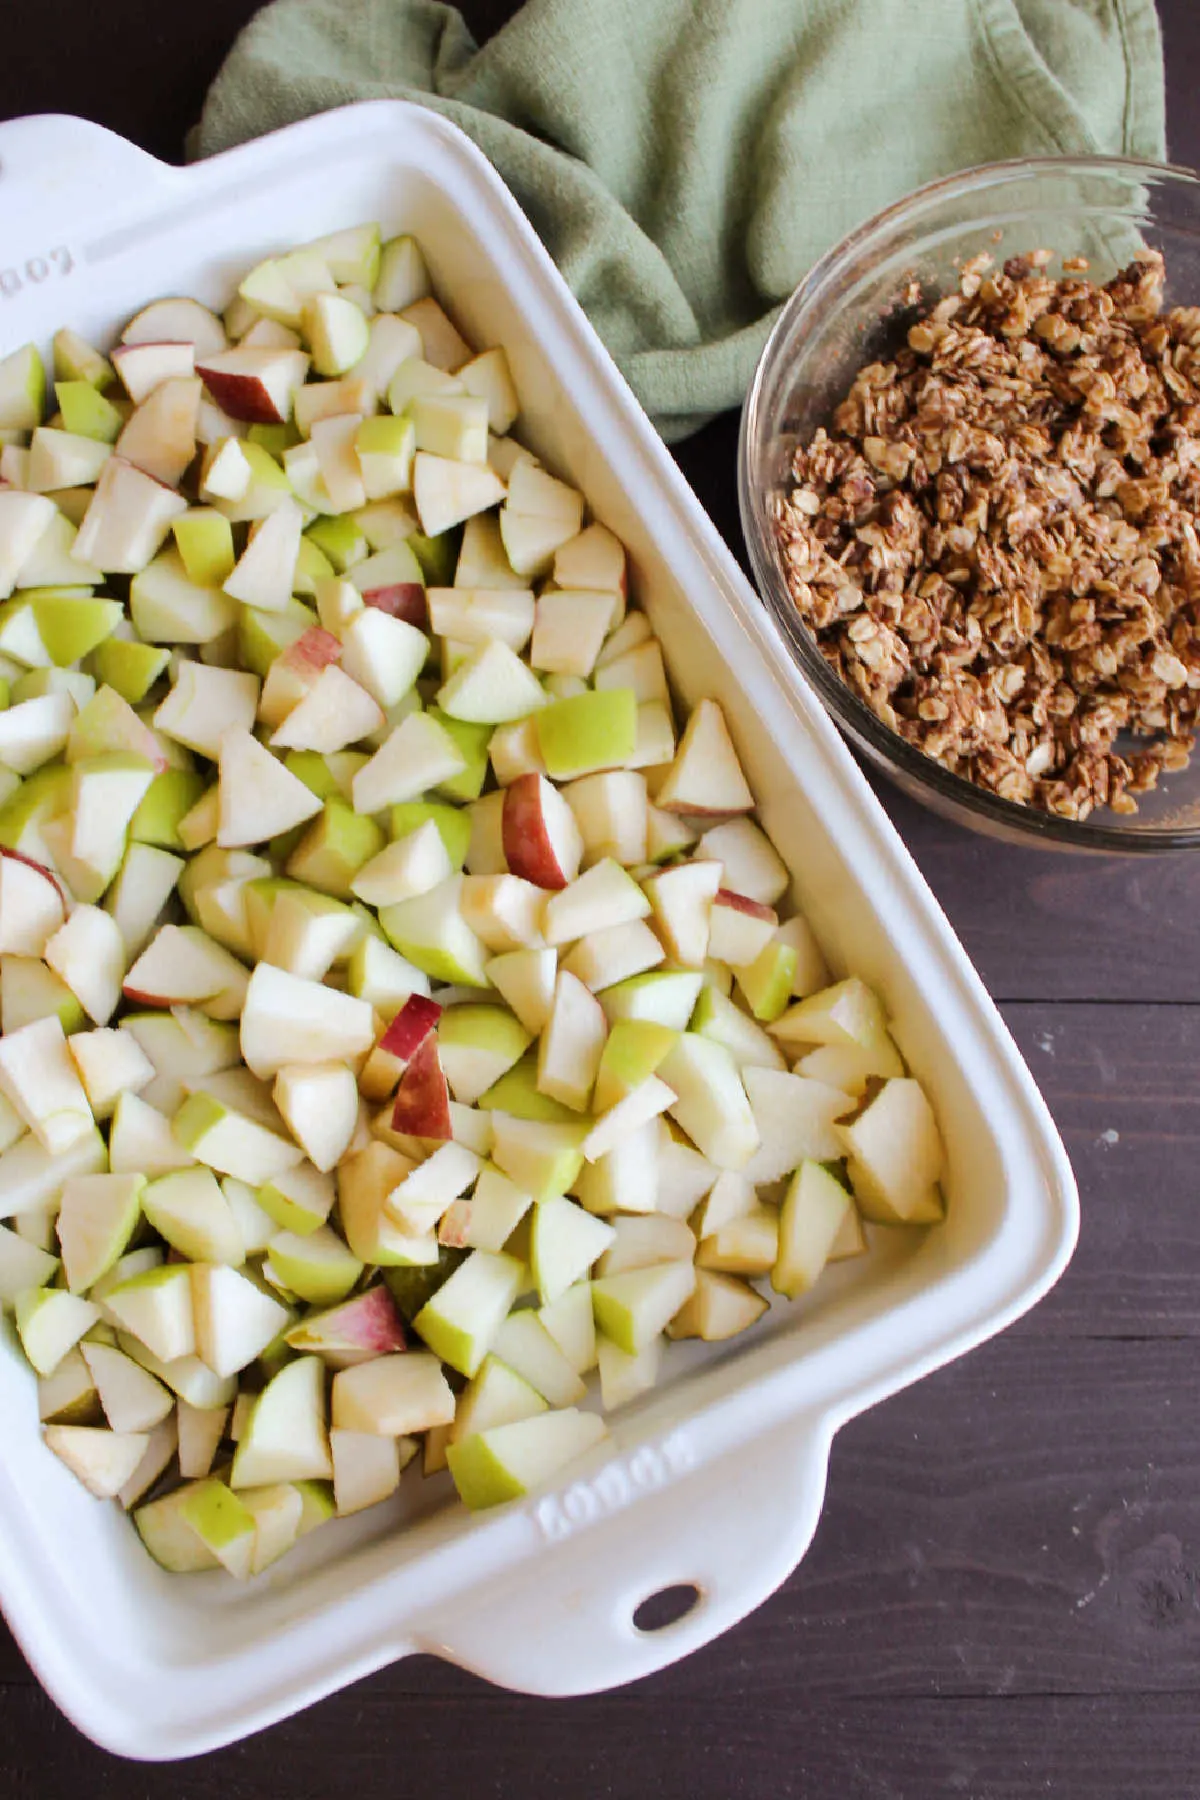 Pan of diced apples next to bowl of oat topping.